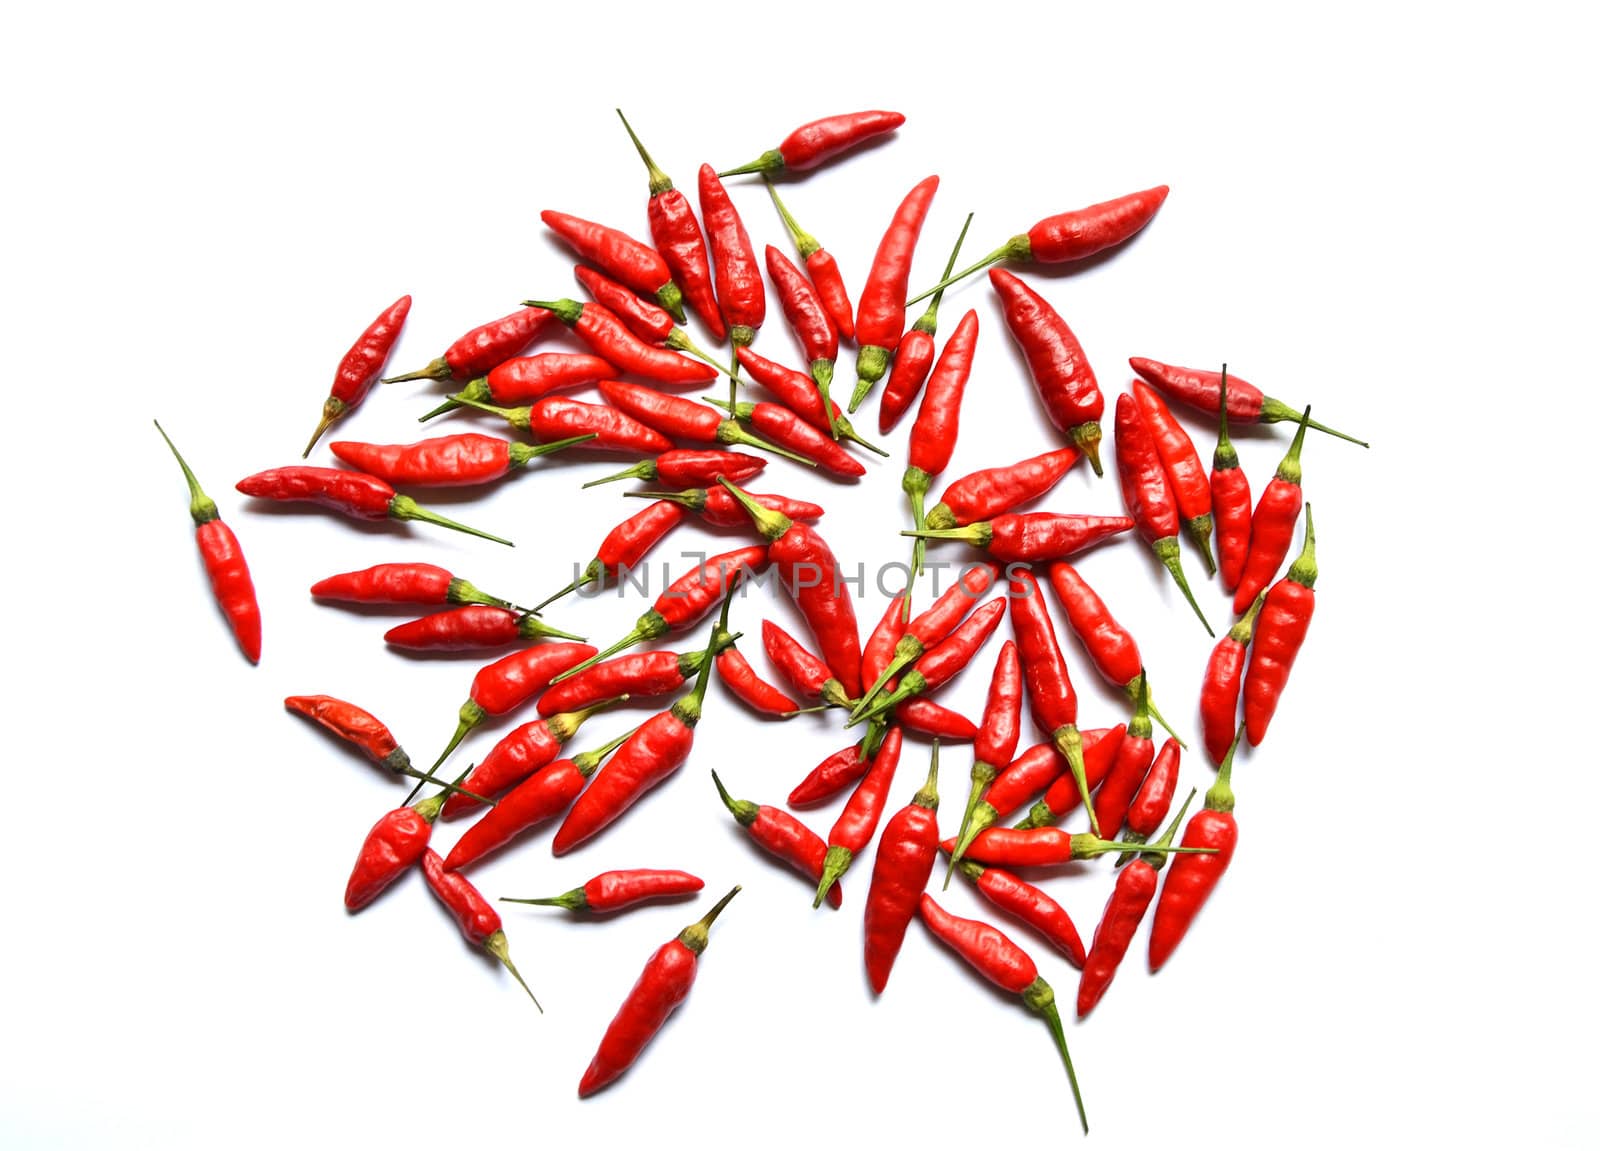 Many of red hot chili pepper on white background